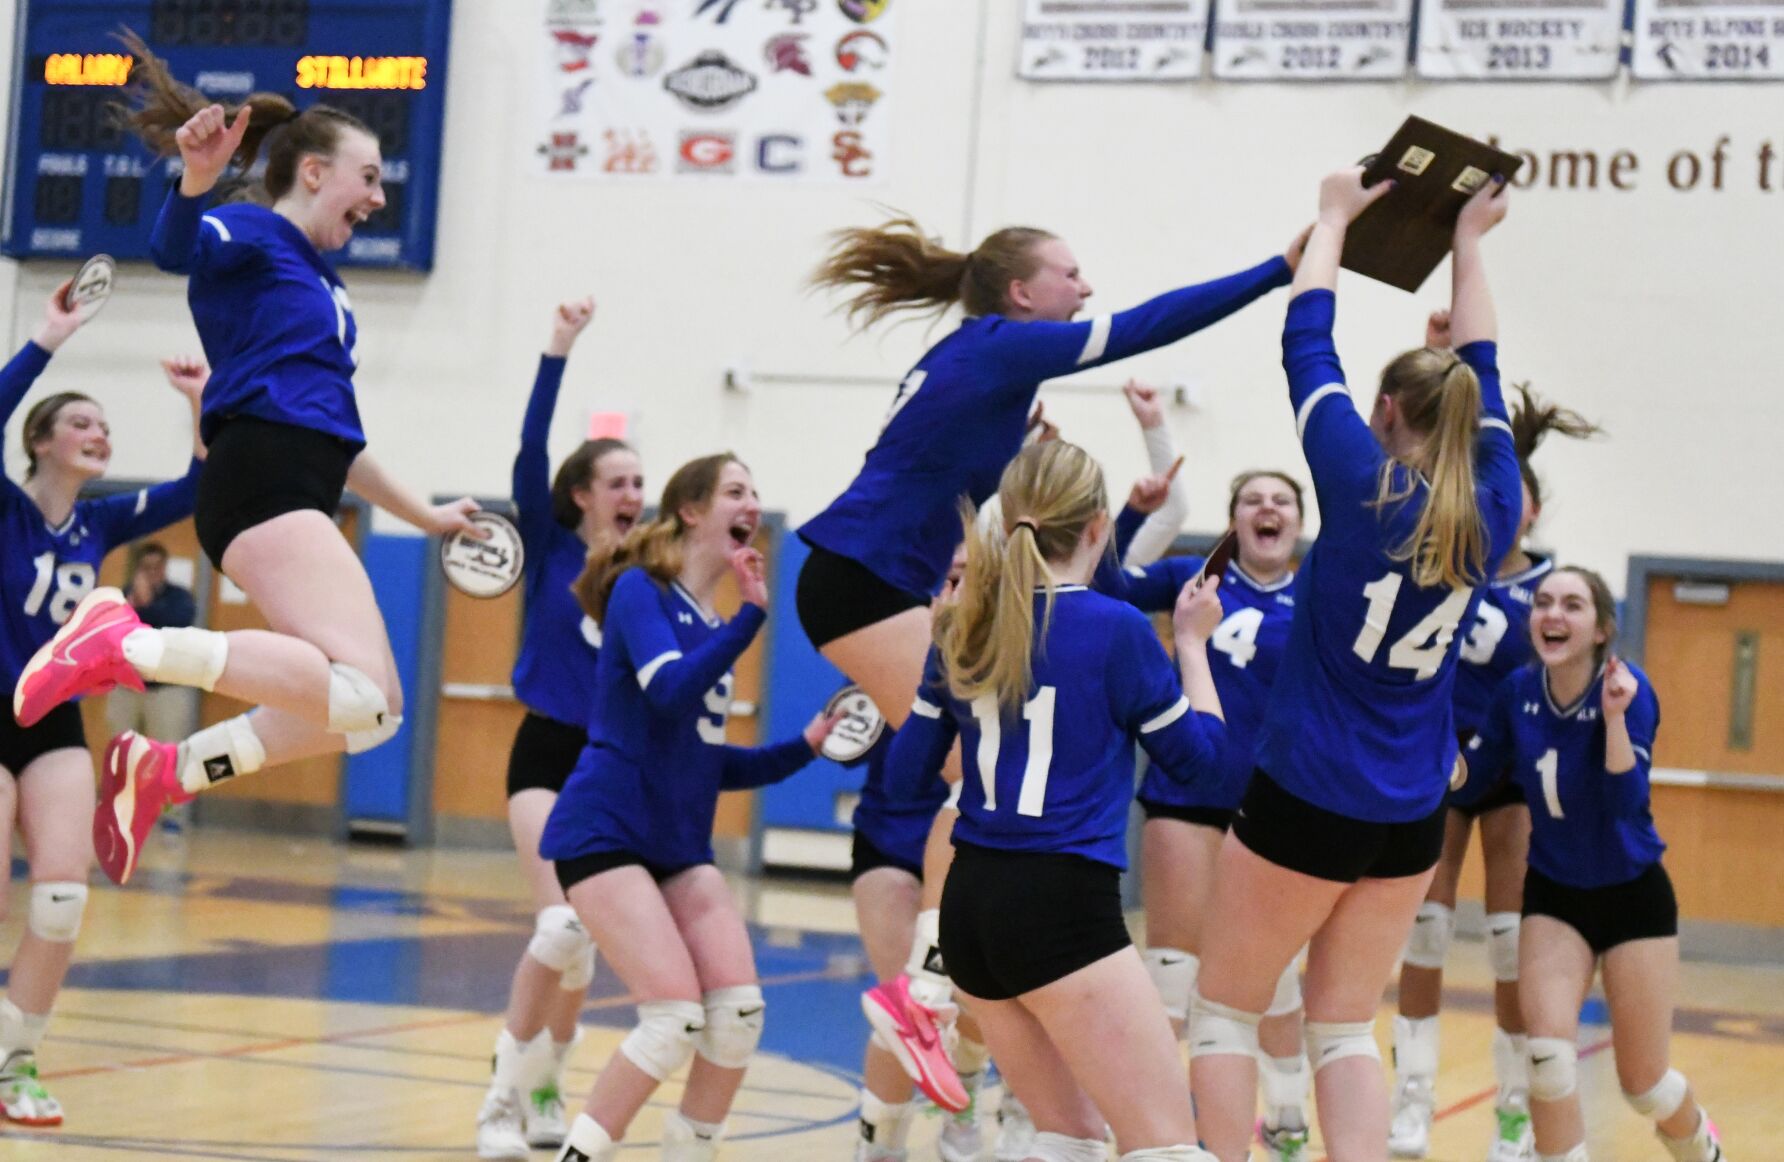 Galway Girls’ Volleyball Team Wins Fourth Straight Section Title with Sweeping Victory over Stillwater